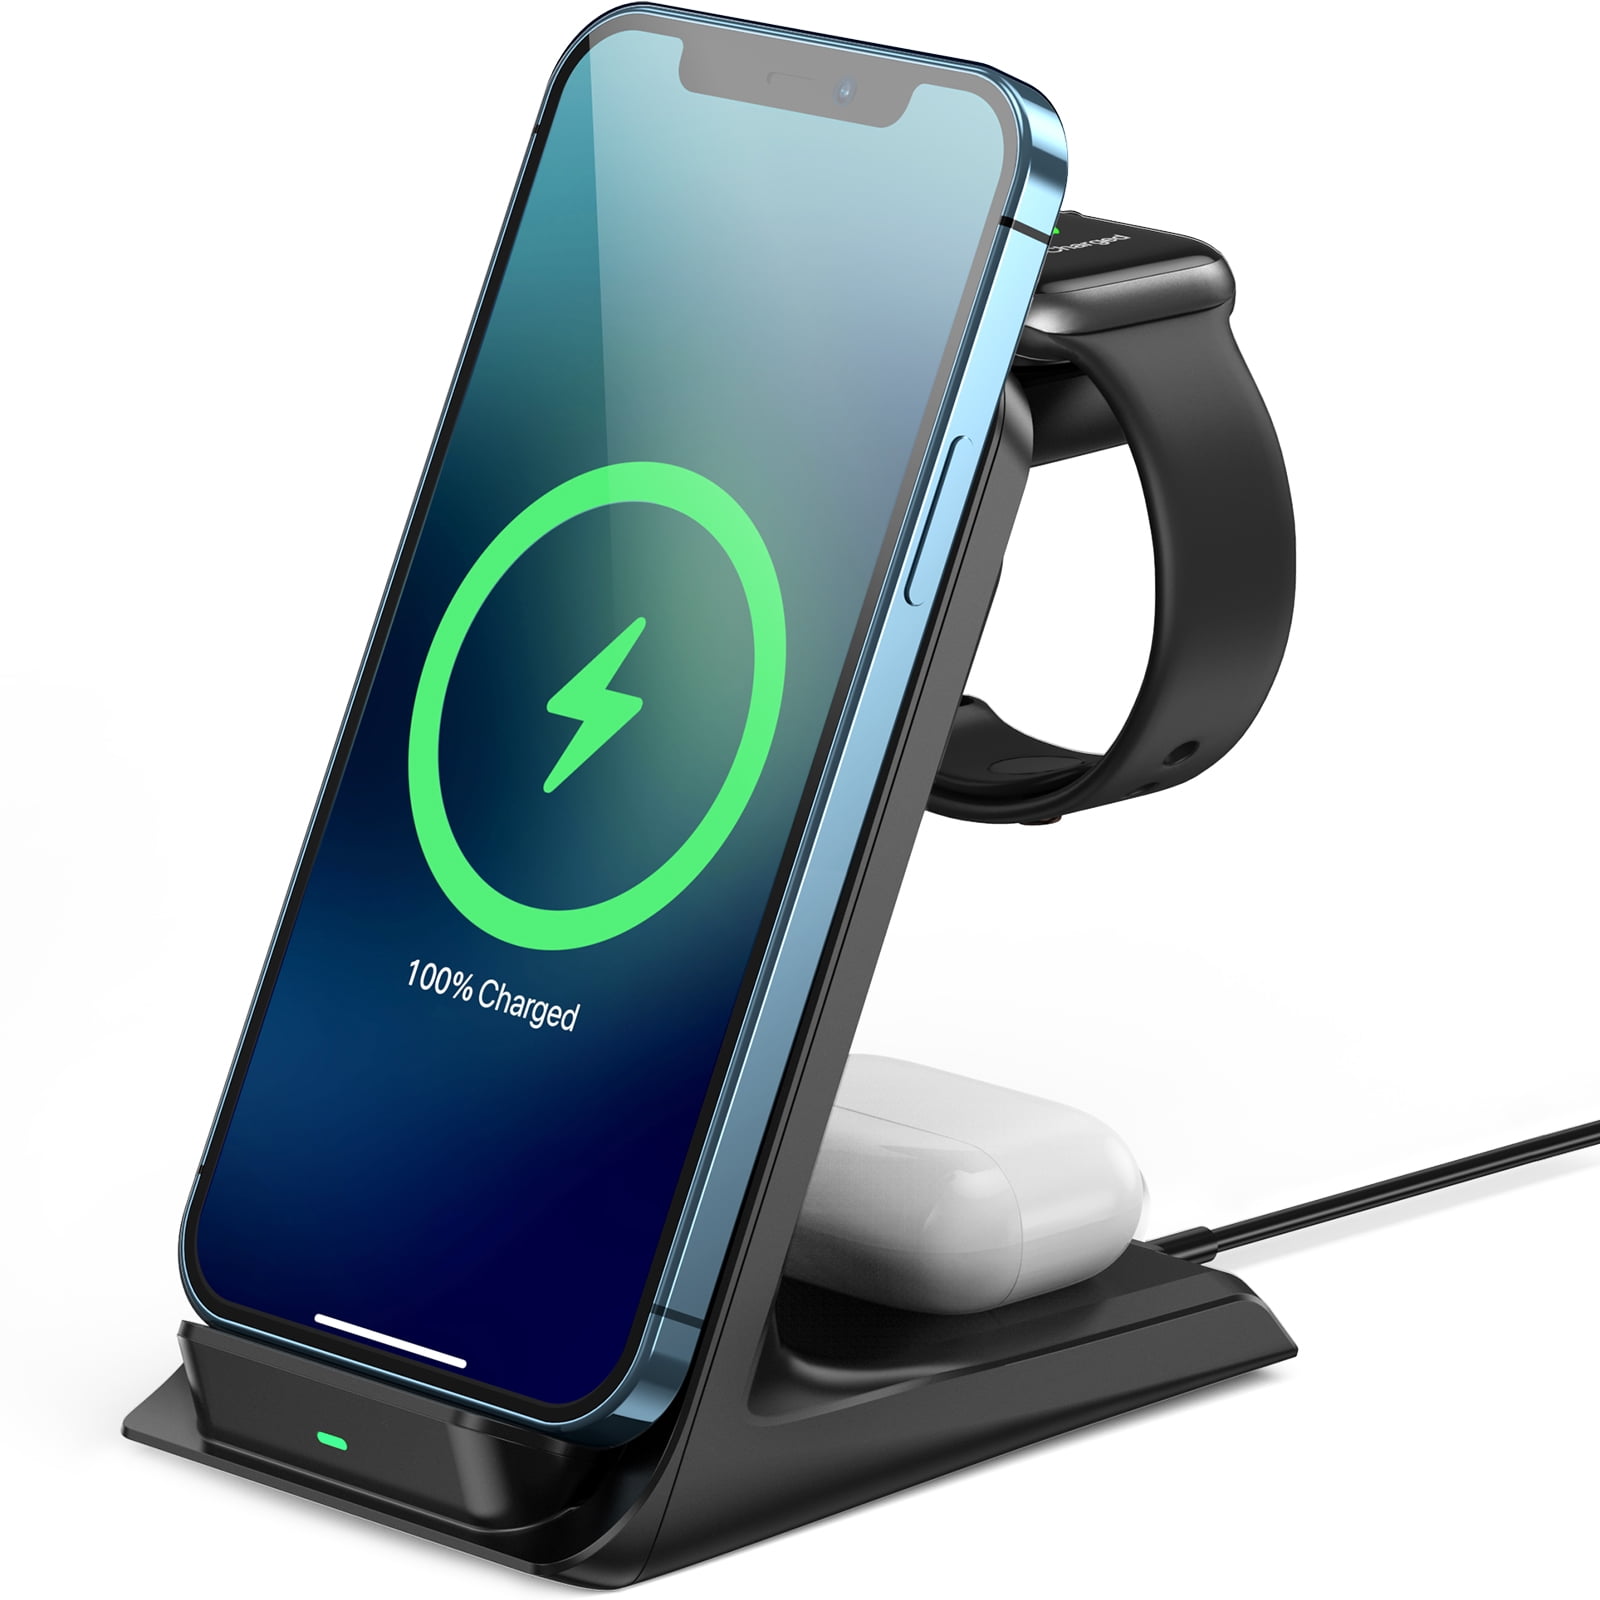 MOING Apple Wireless Charger Airpods Pro/2 3 in 1 18W Qi Charging Station/Stand/Dock Compatible with iPhone 12/11 Pro Series/XS Max/XR/X/8 Plus/SE Compatible for iWatch Apple Watch 6/5/4/3/2